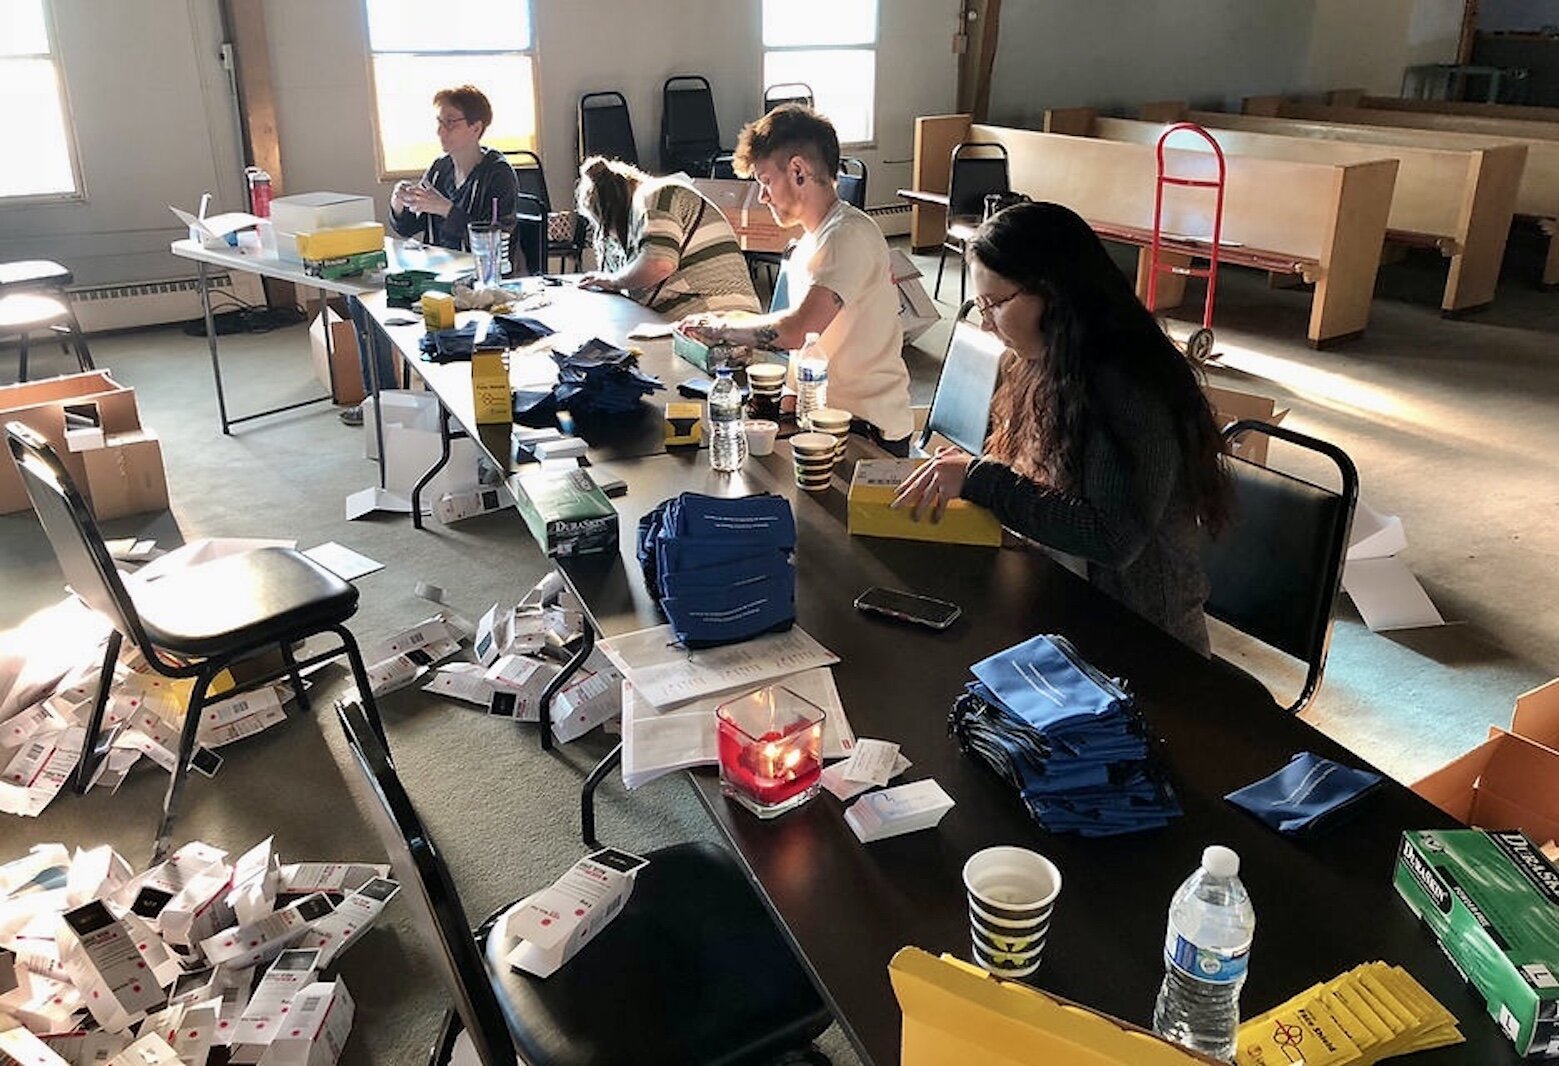 Volunteers are shown assembling Narcan kits as part of COPE Network’s Naloxone Distribution Program. The medication is used to counteract the initial effects of a drug overdose.